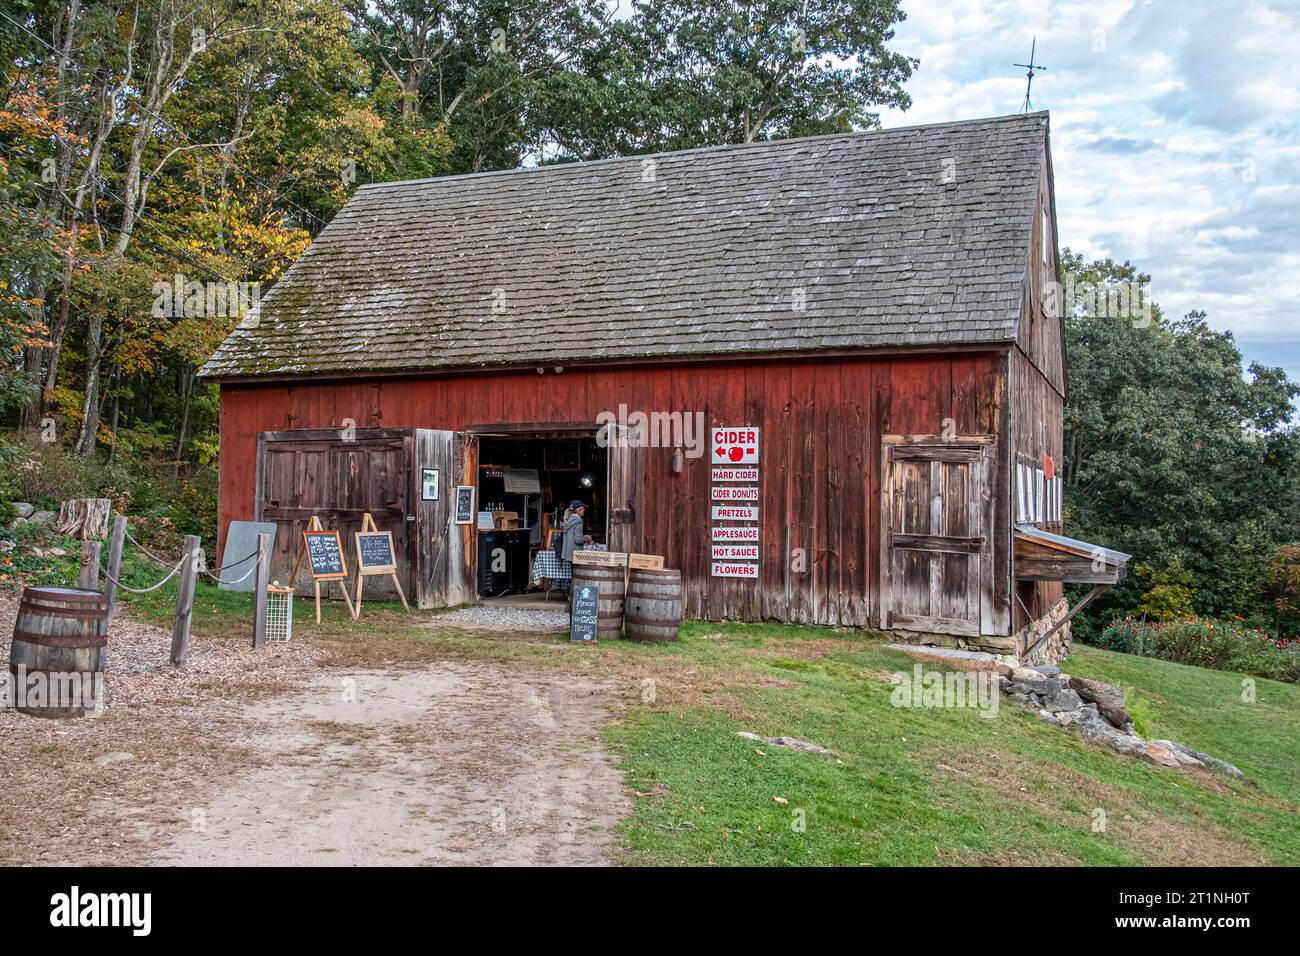 An old barn in New Salem, Massachusetts where cider is made and sold Stock Photo